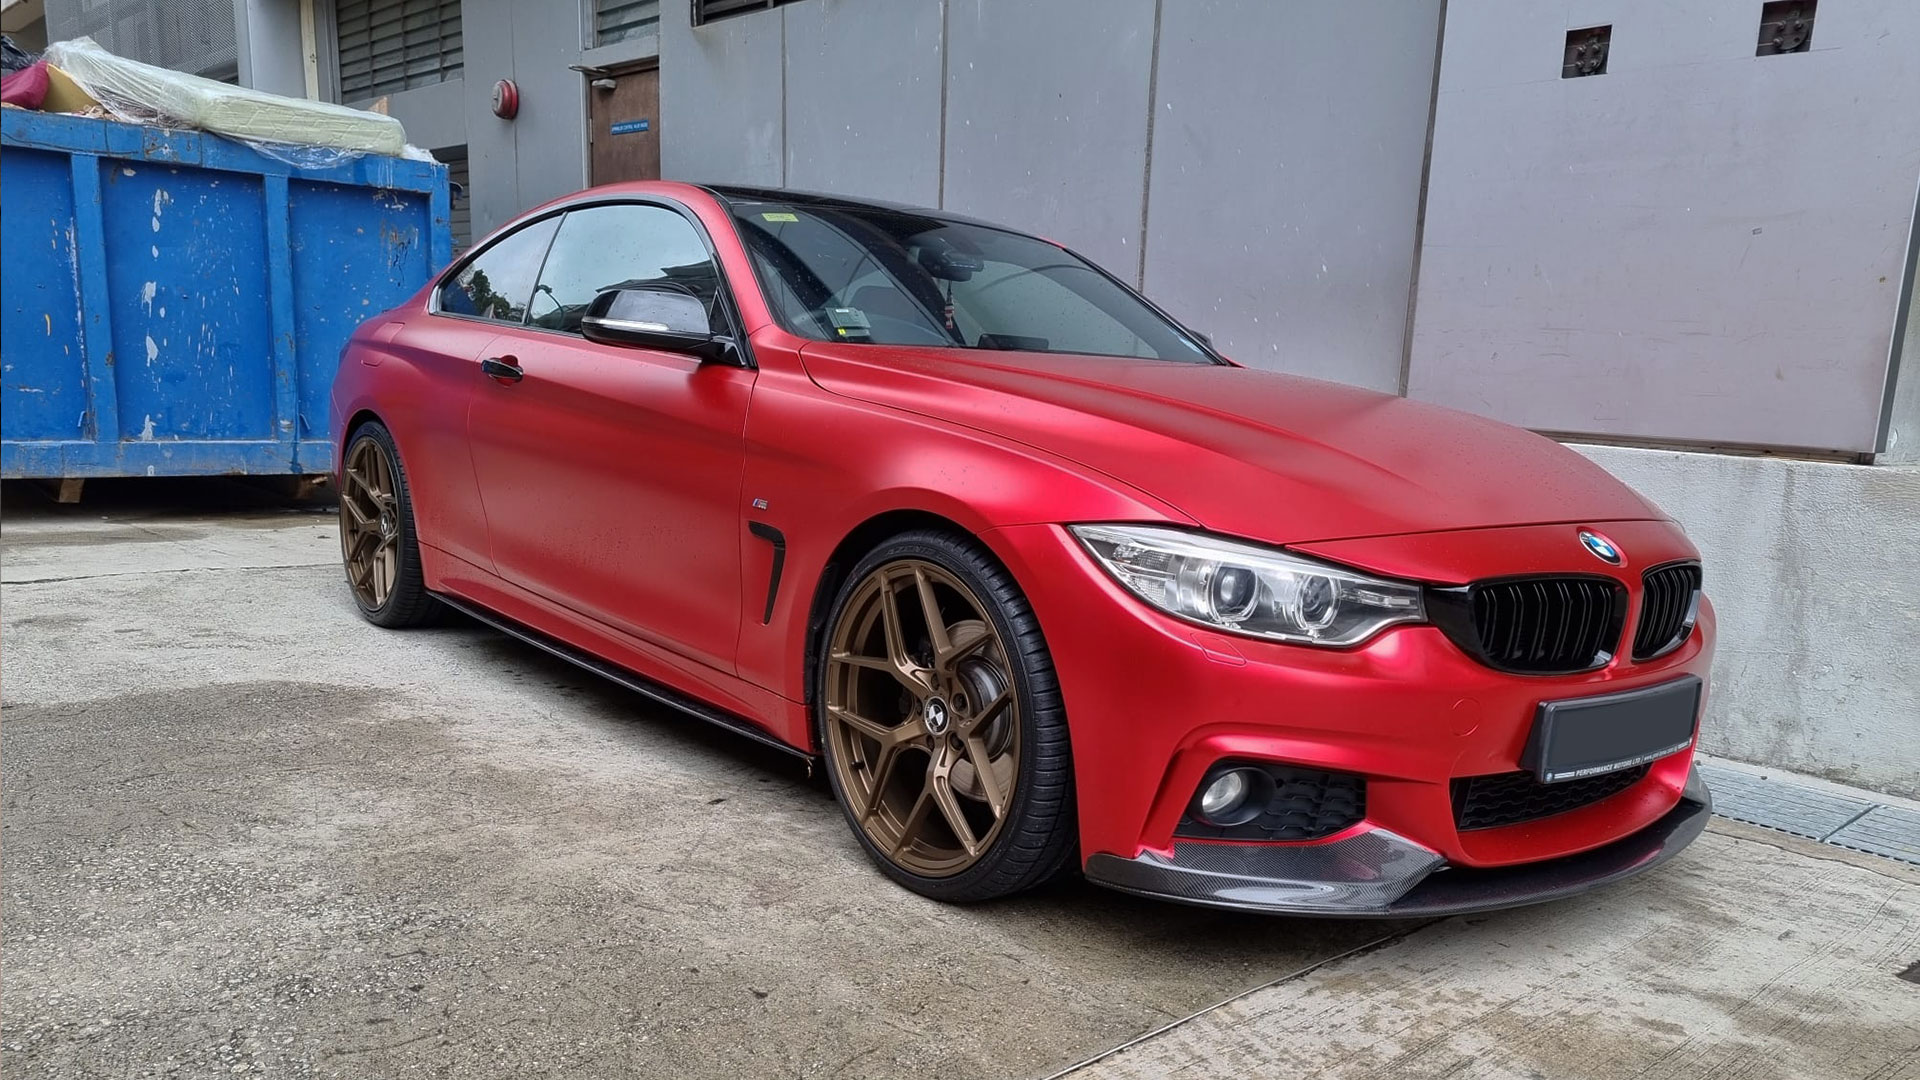 A red BMW 4 series F32 on 20 inch monoblock Custom Forged Wheels in bronze finish